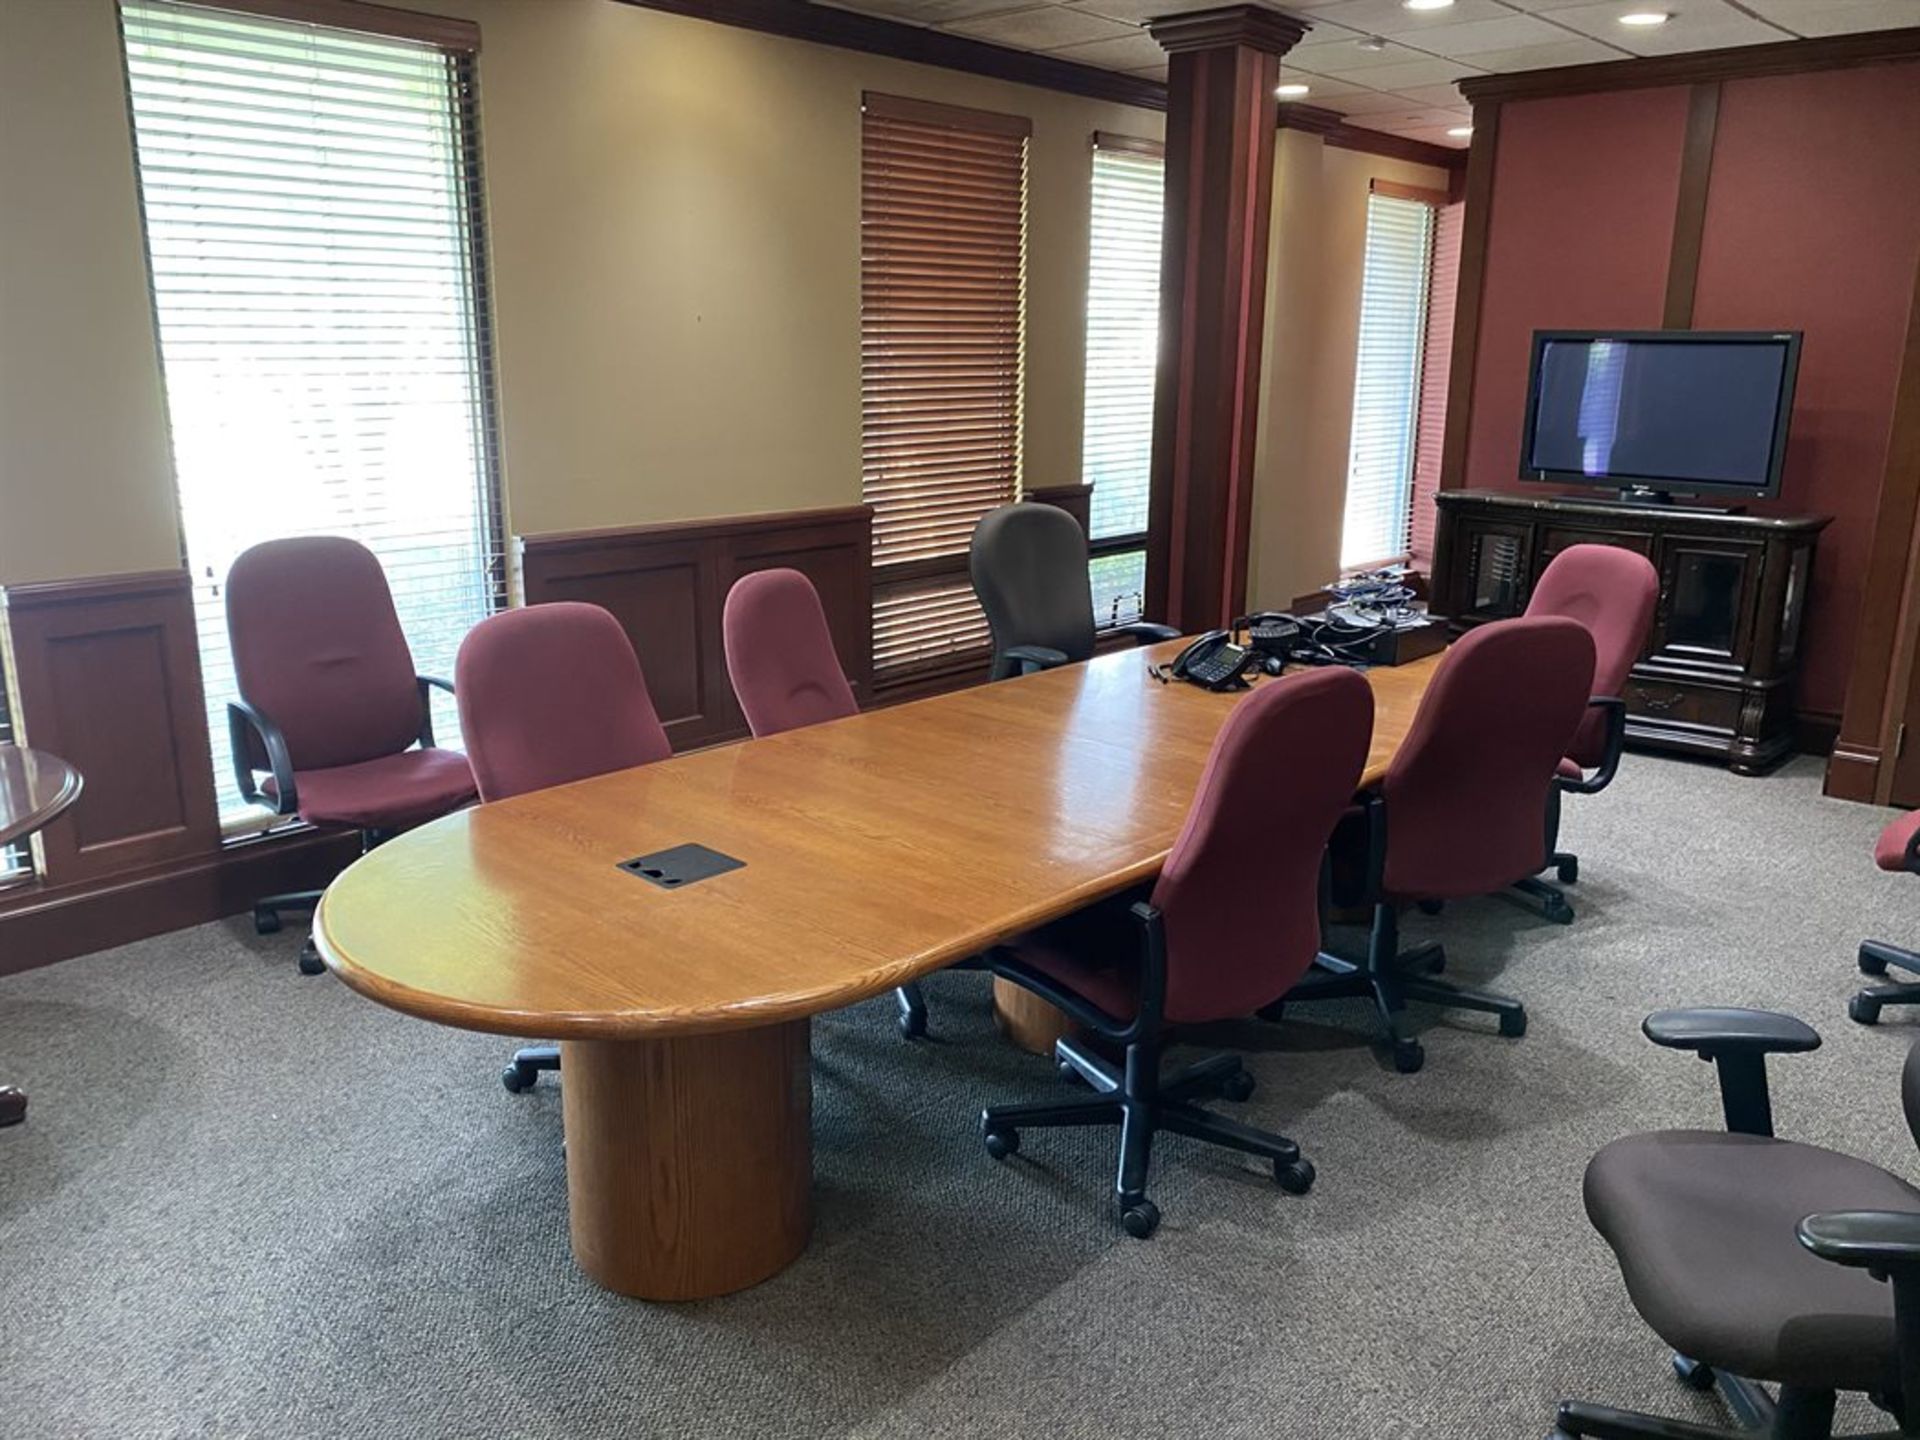 Conference Room Furniture (Furniture Only) - Image 2 of 4